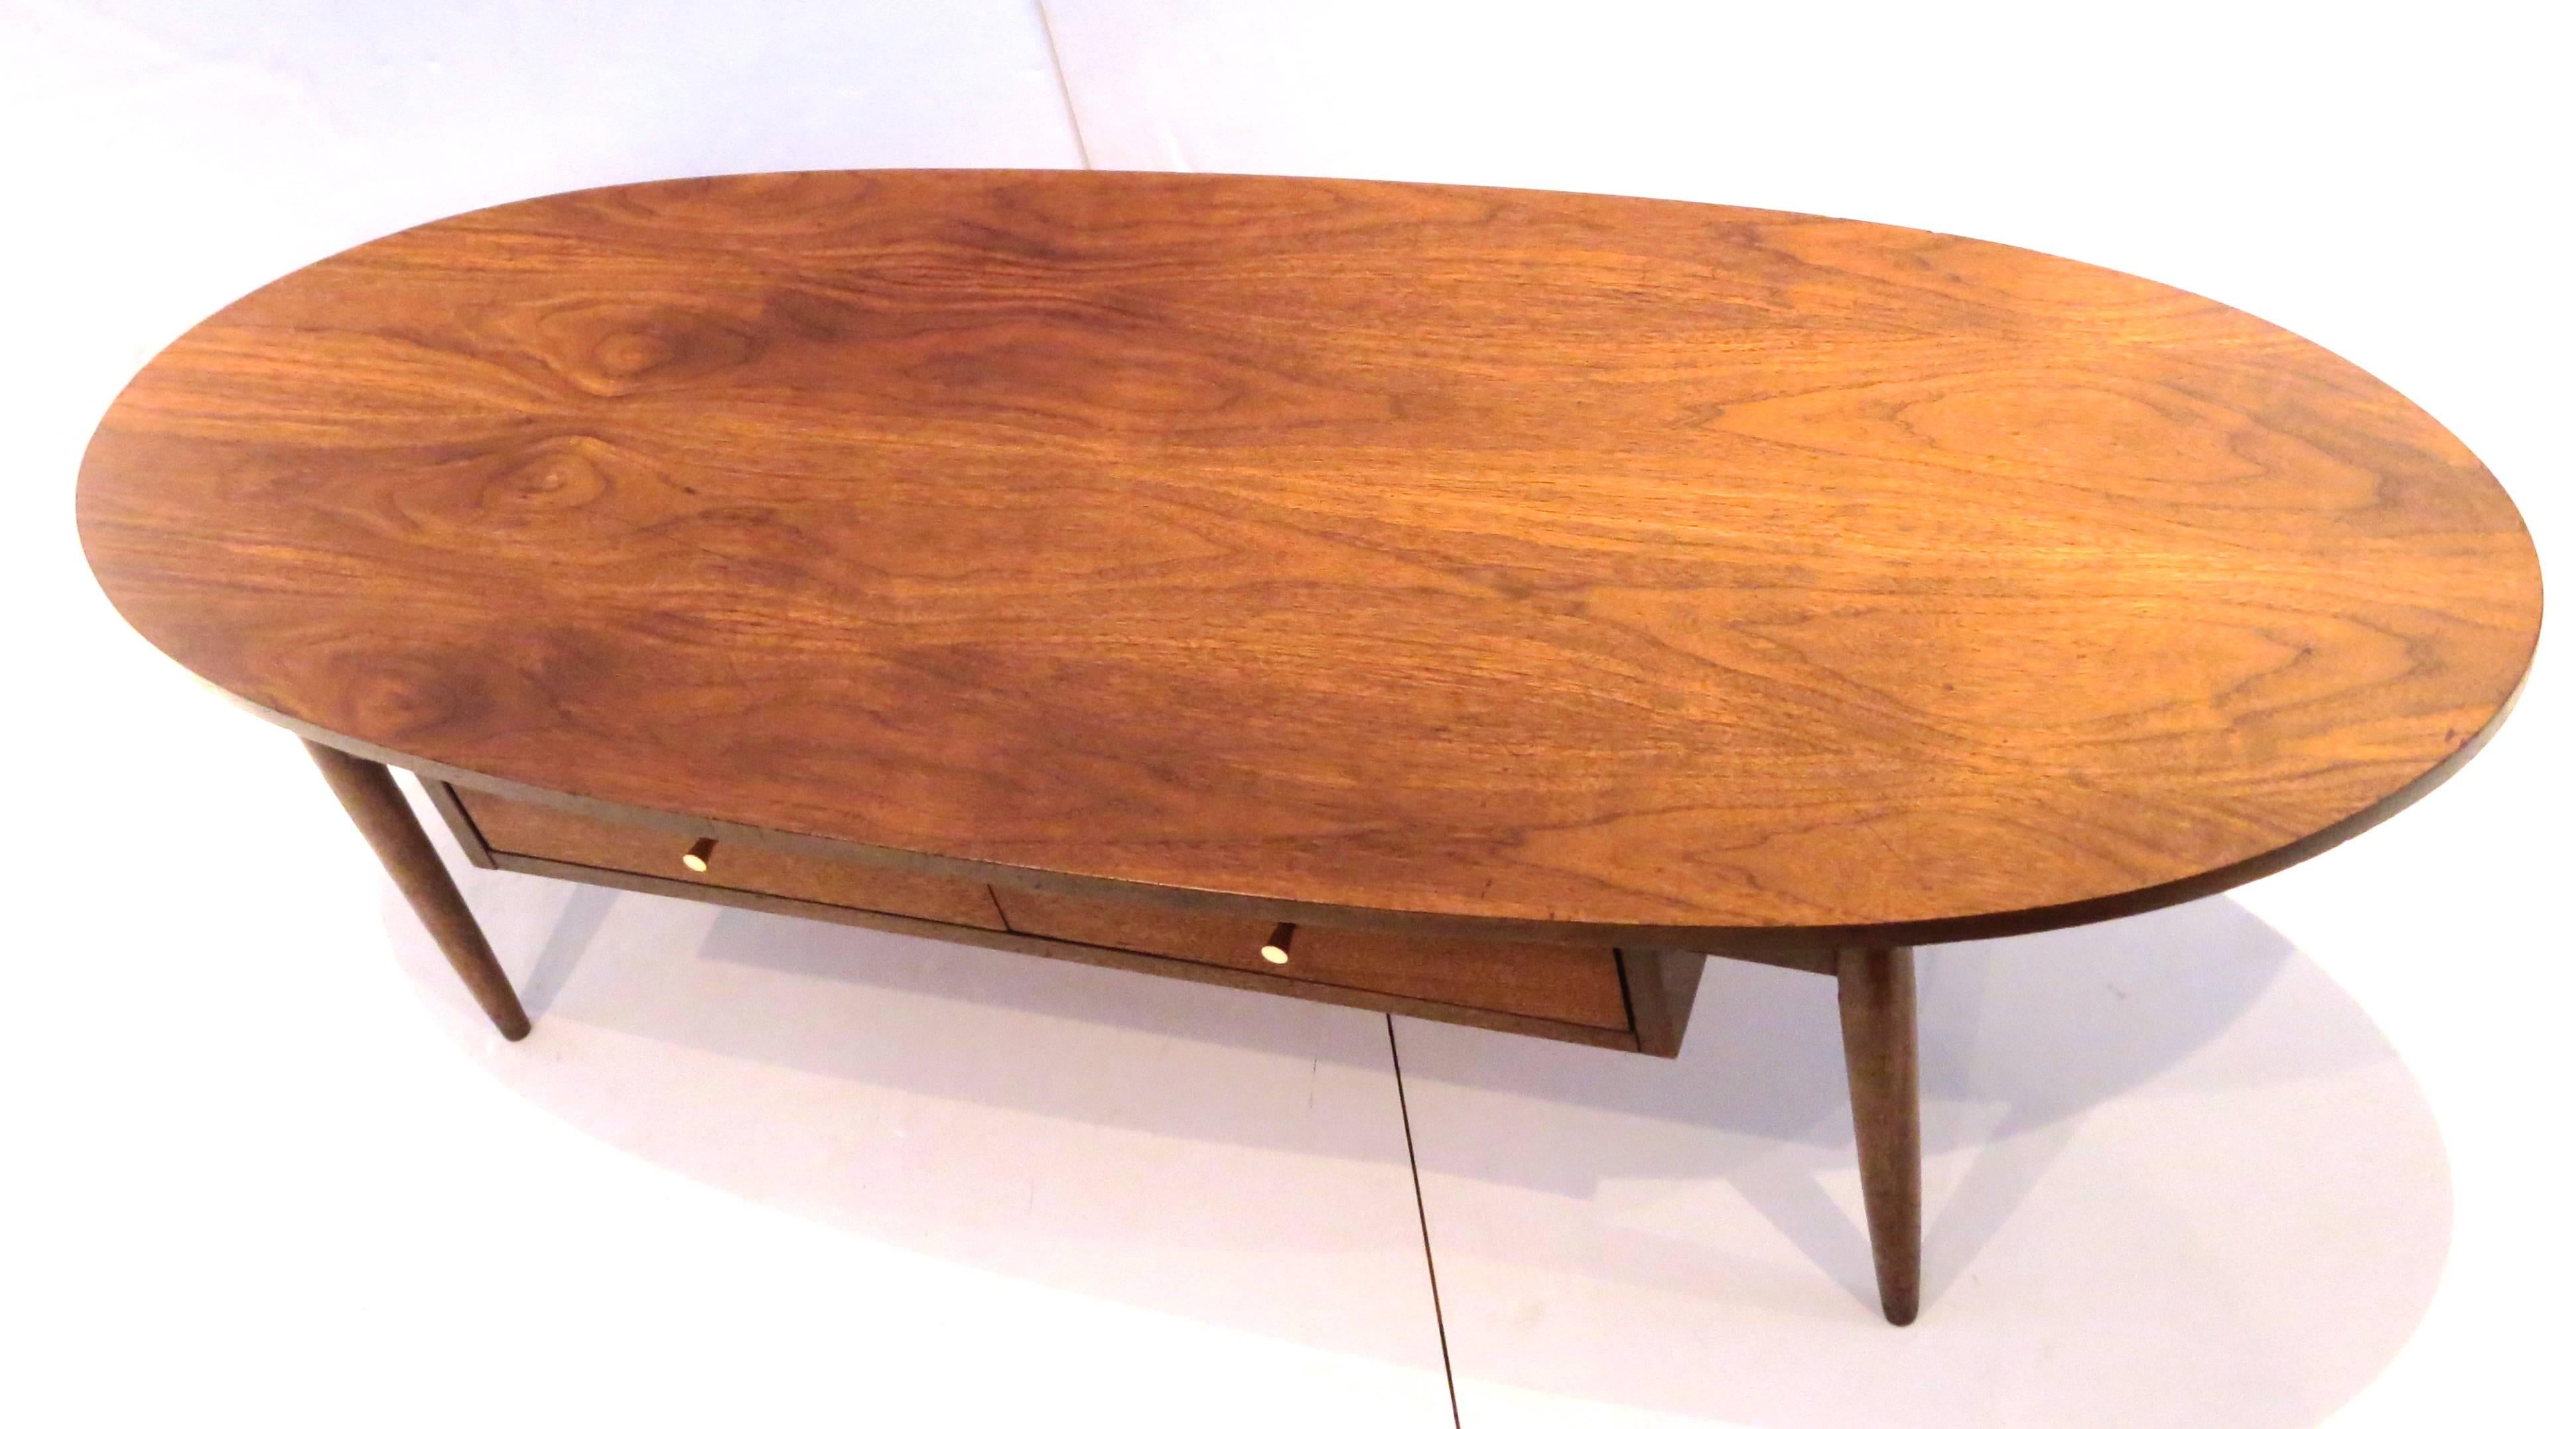 1950s Atomic Age American Walnut Oval Coffee Table with Brass Knobs 1